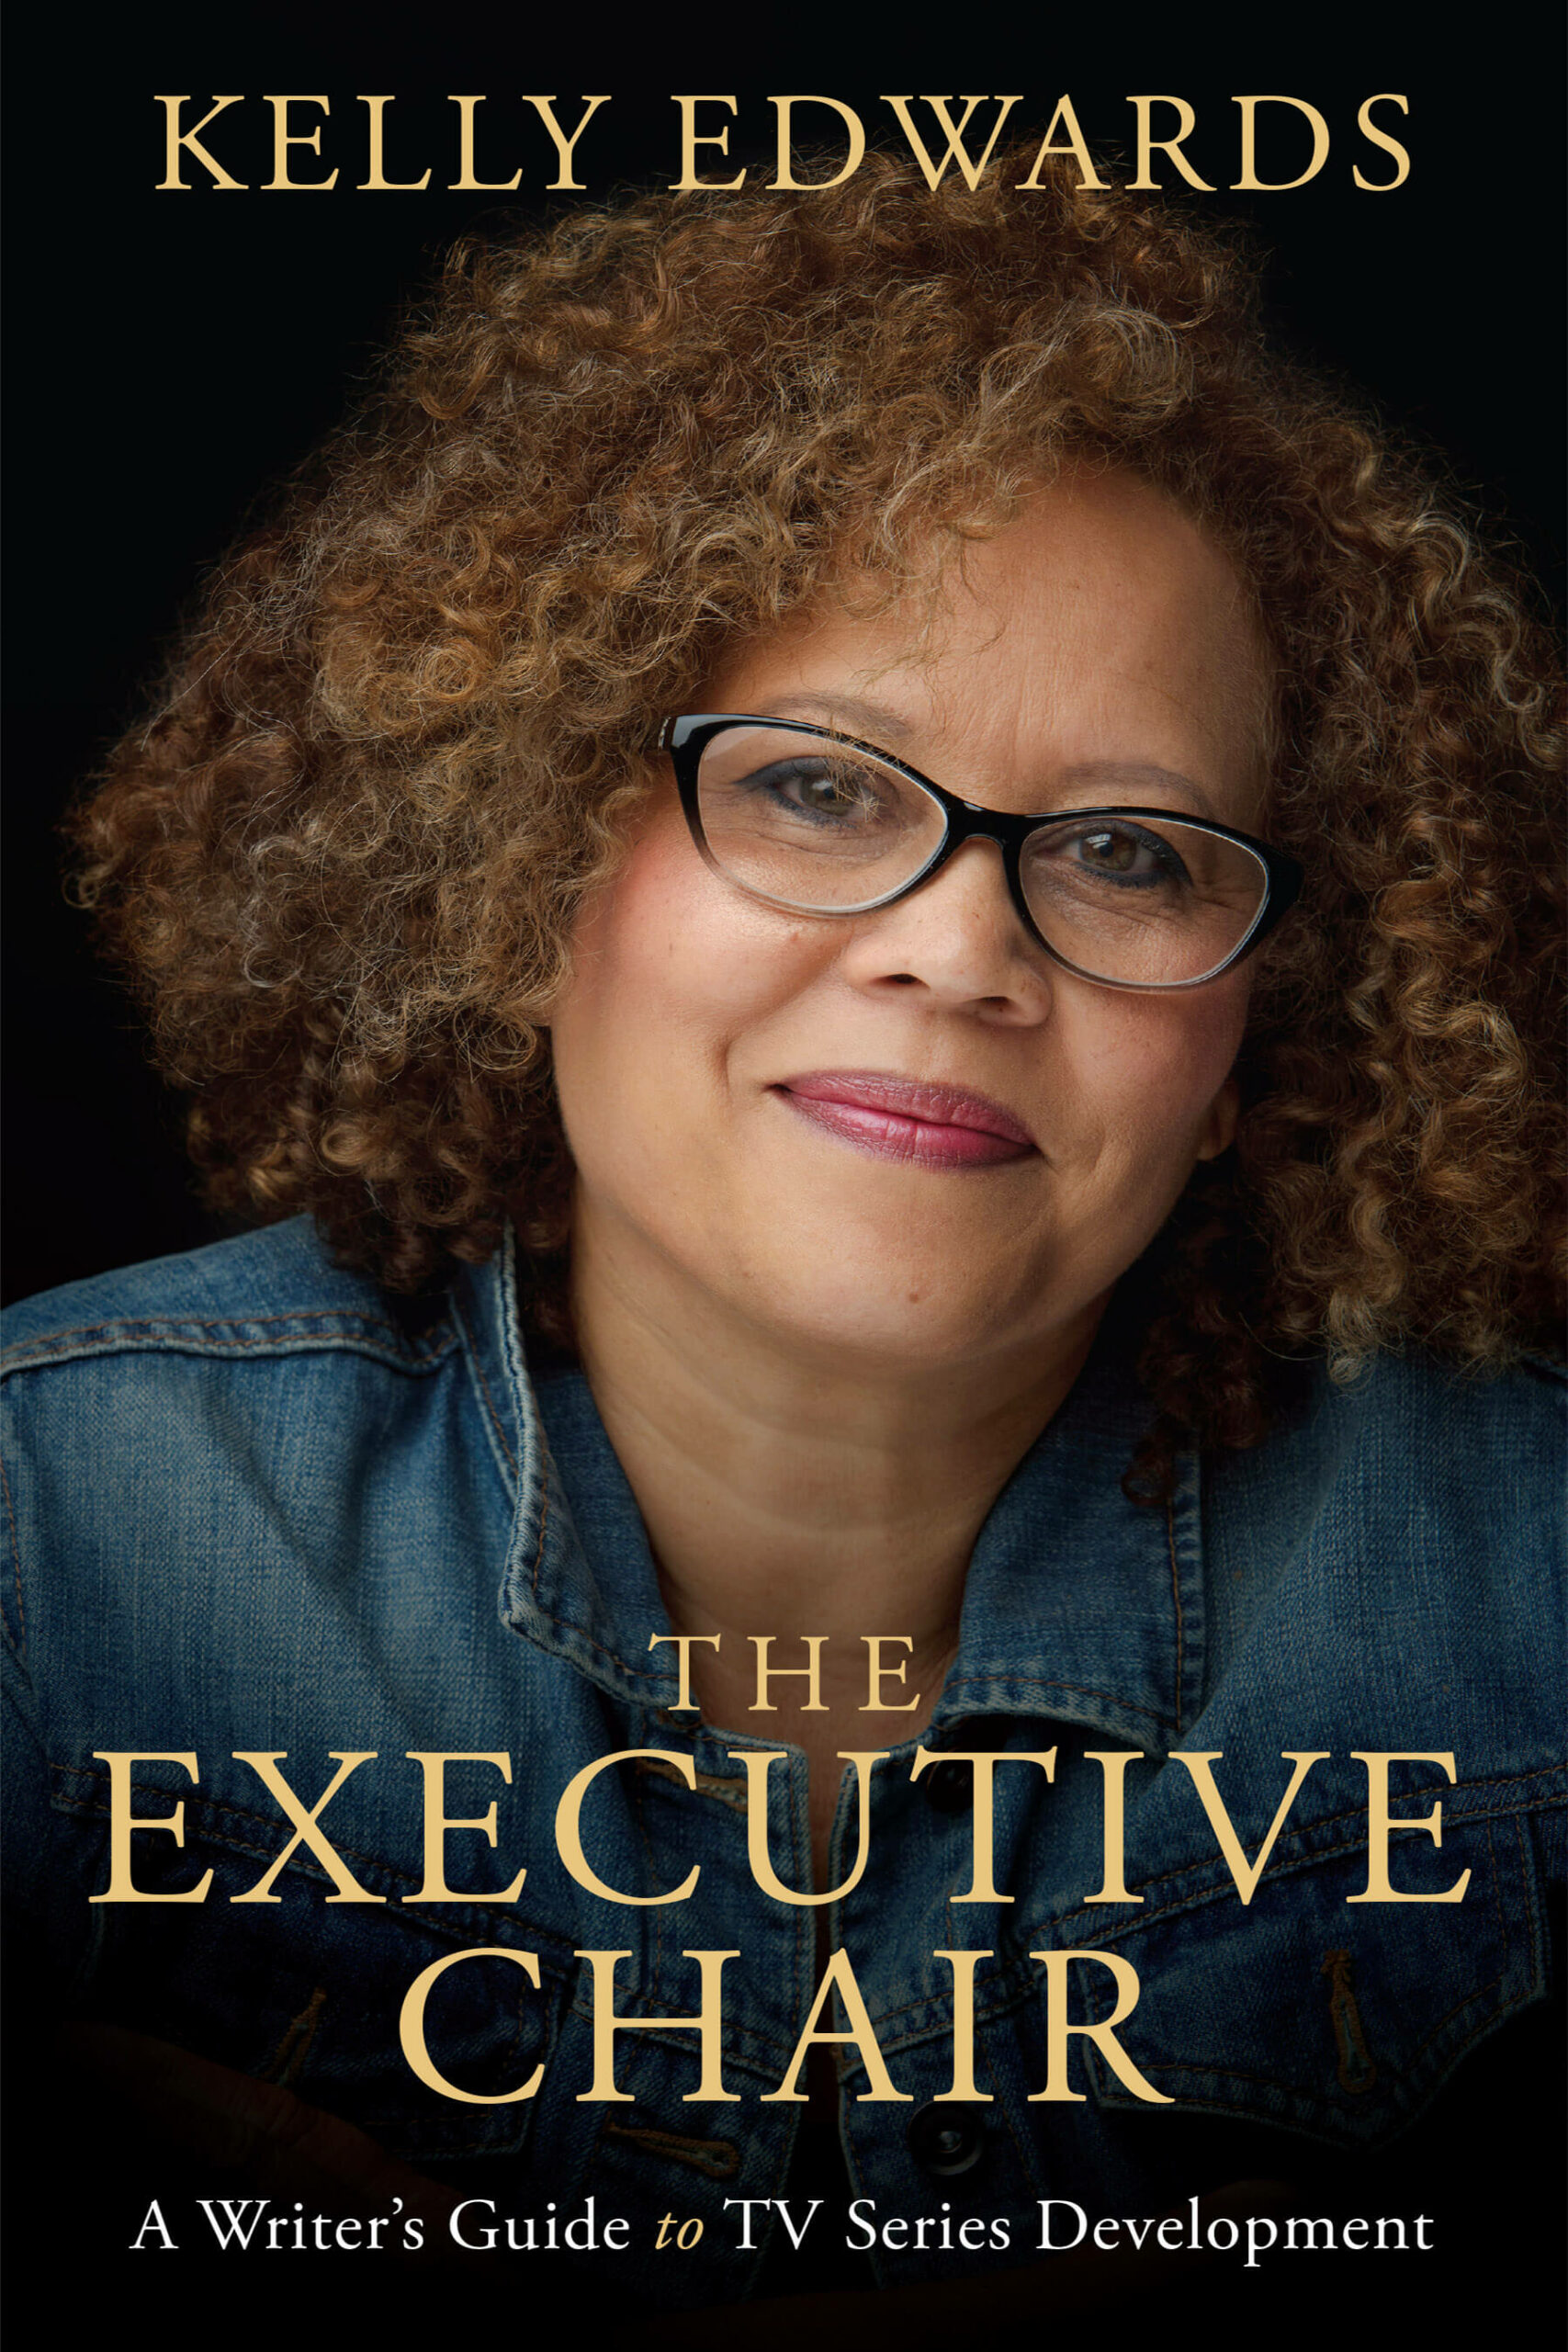 The Executive Chair: A Writer’s Guide to TV Series Development